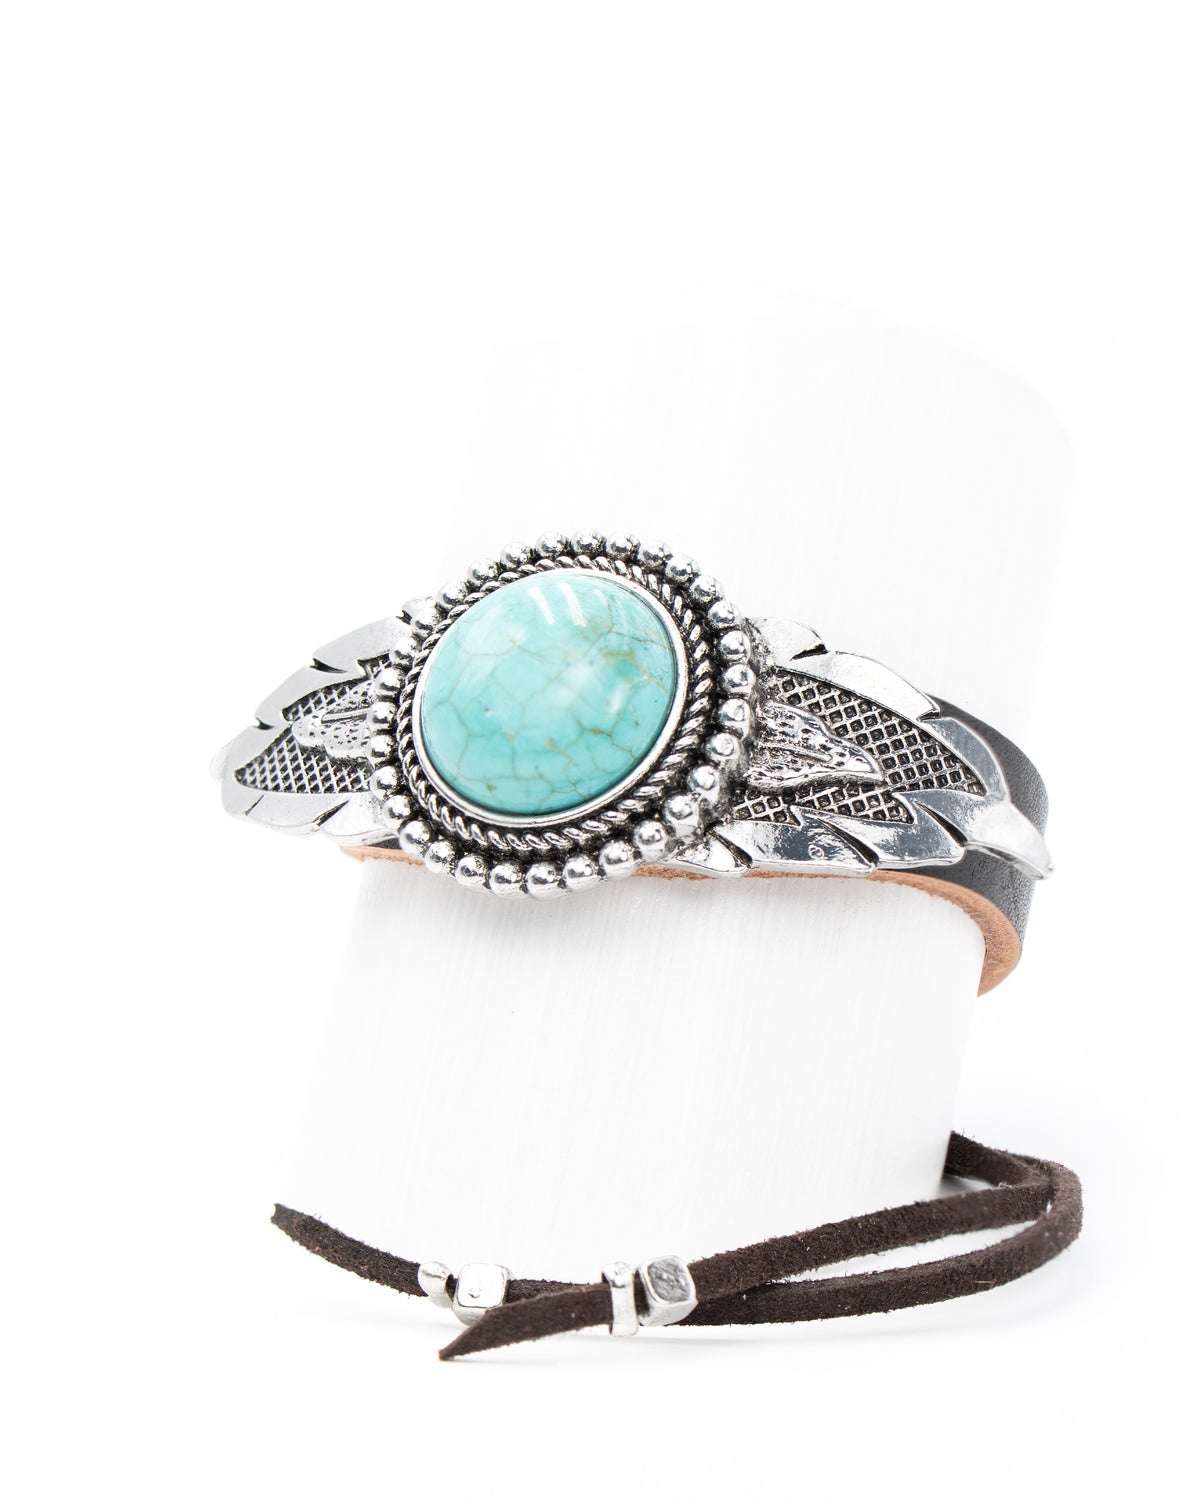 Up to Heaven Cuff